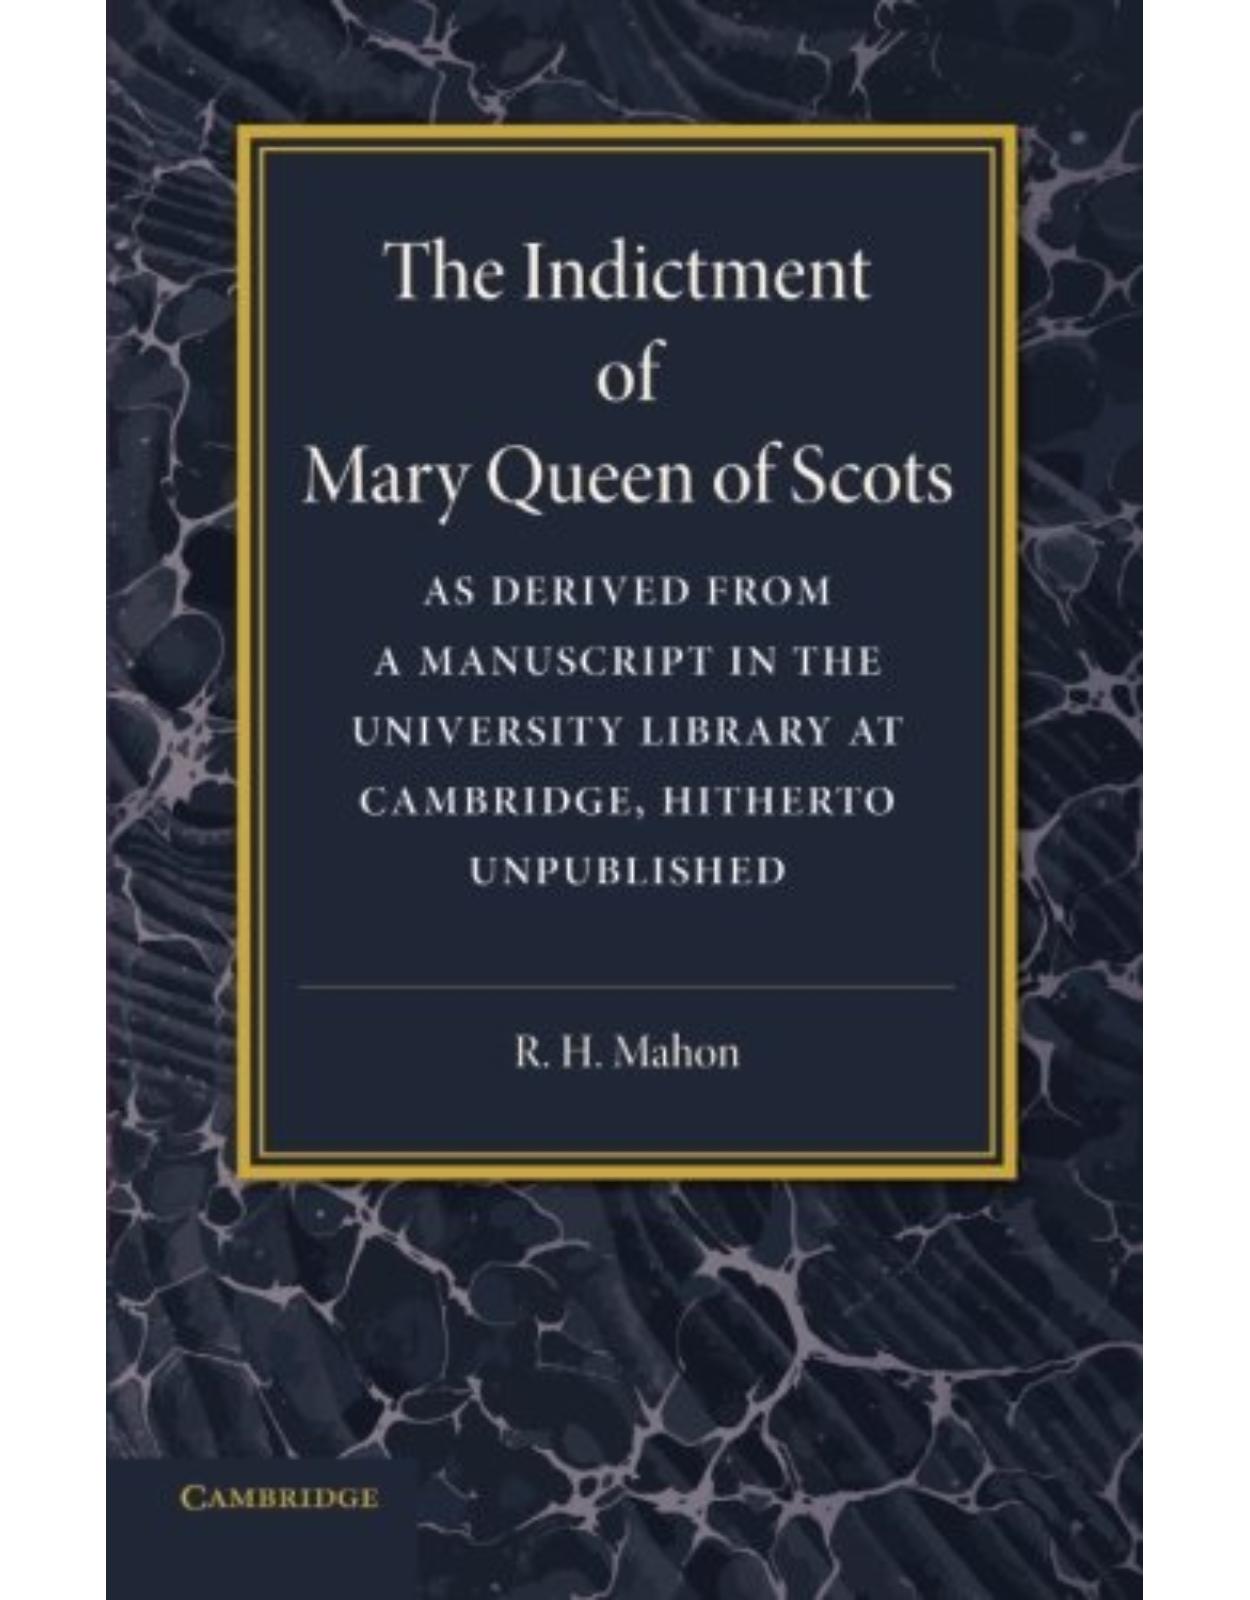 The Indictment of Mary Queen of Scots: As Derived from a Manuscript in the University Library at Cambridge, Hitherto Unpublished 